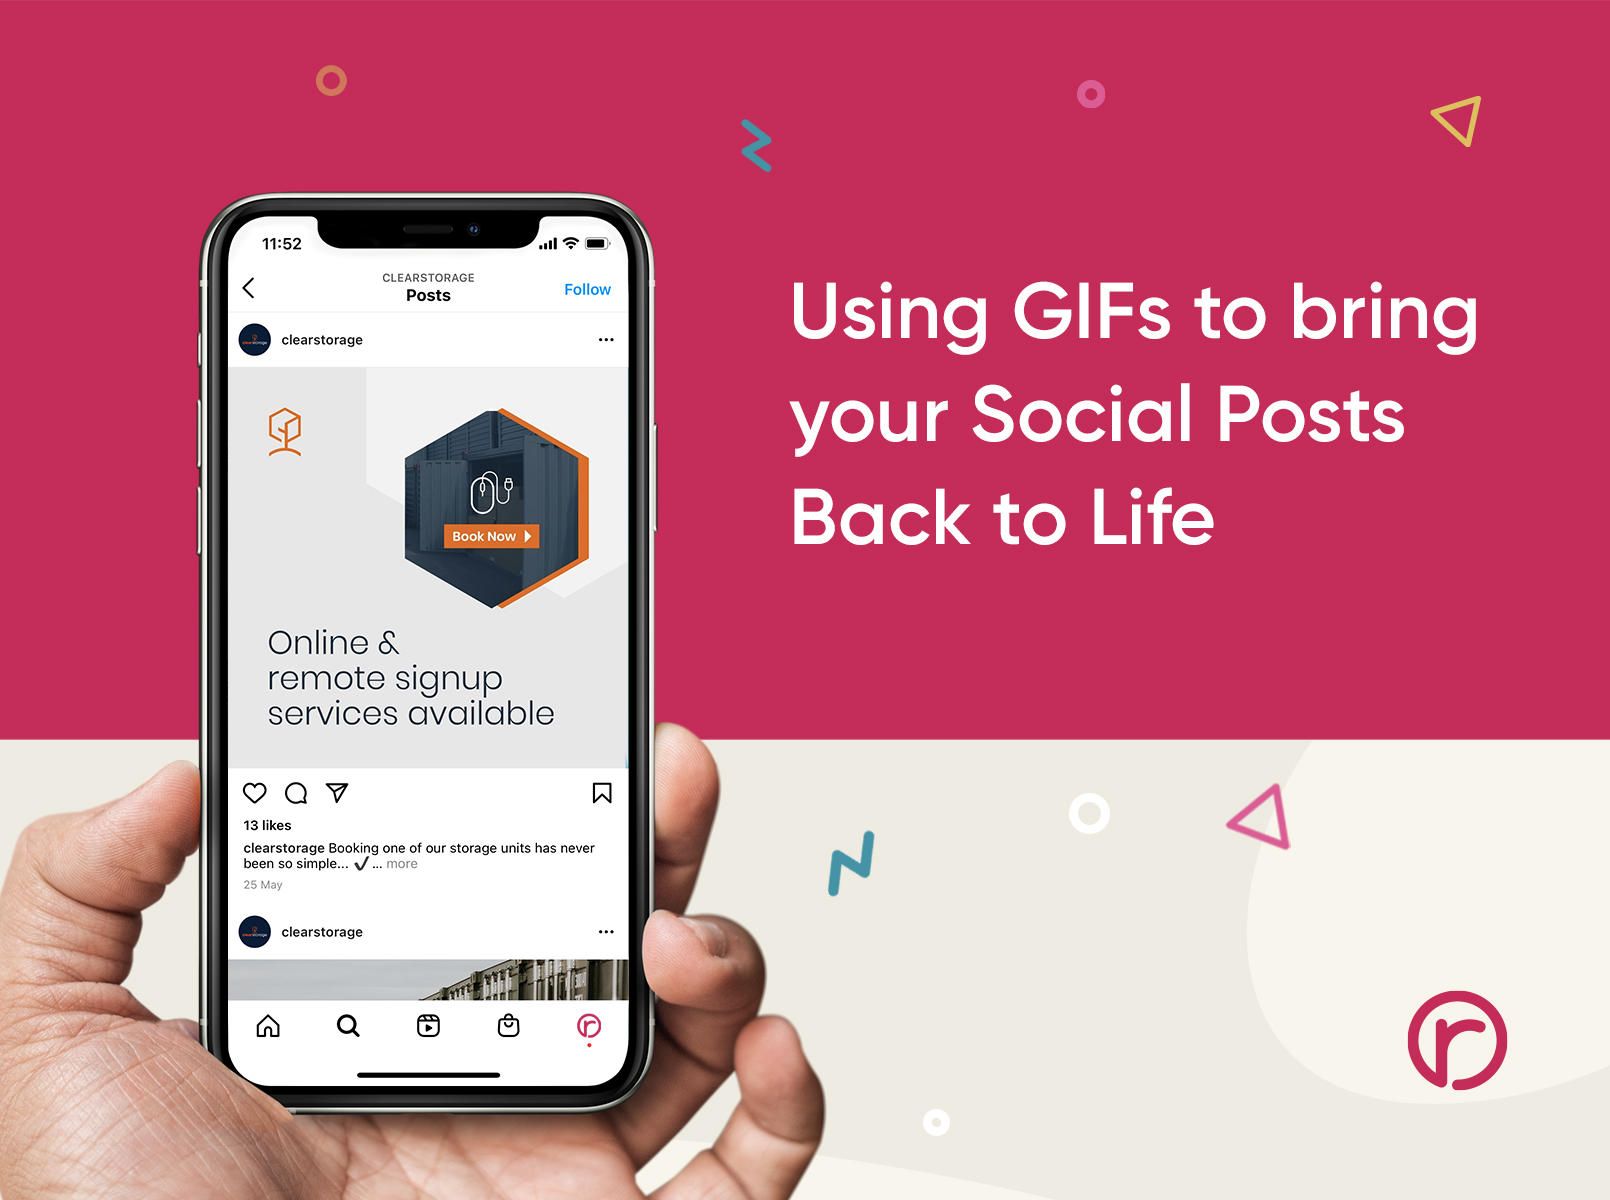 Using GIFs to bring your social posts back to life!